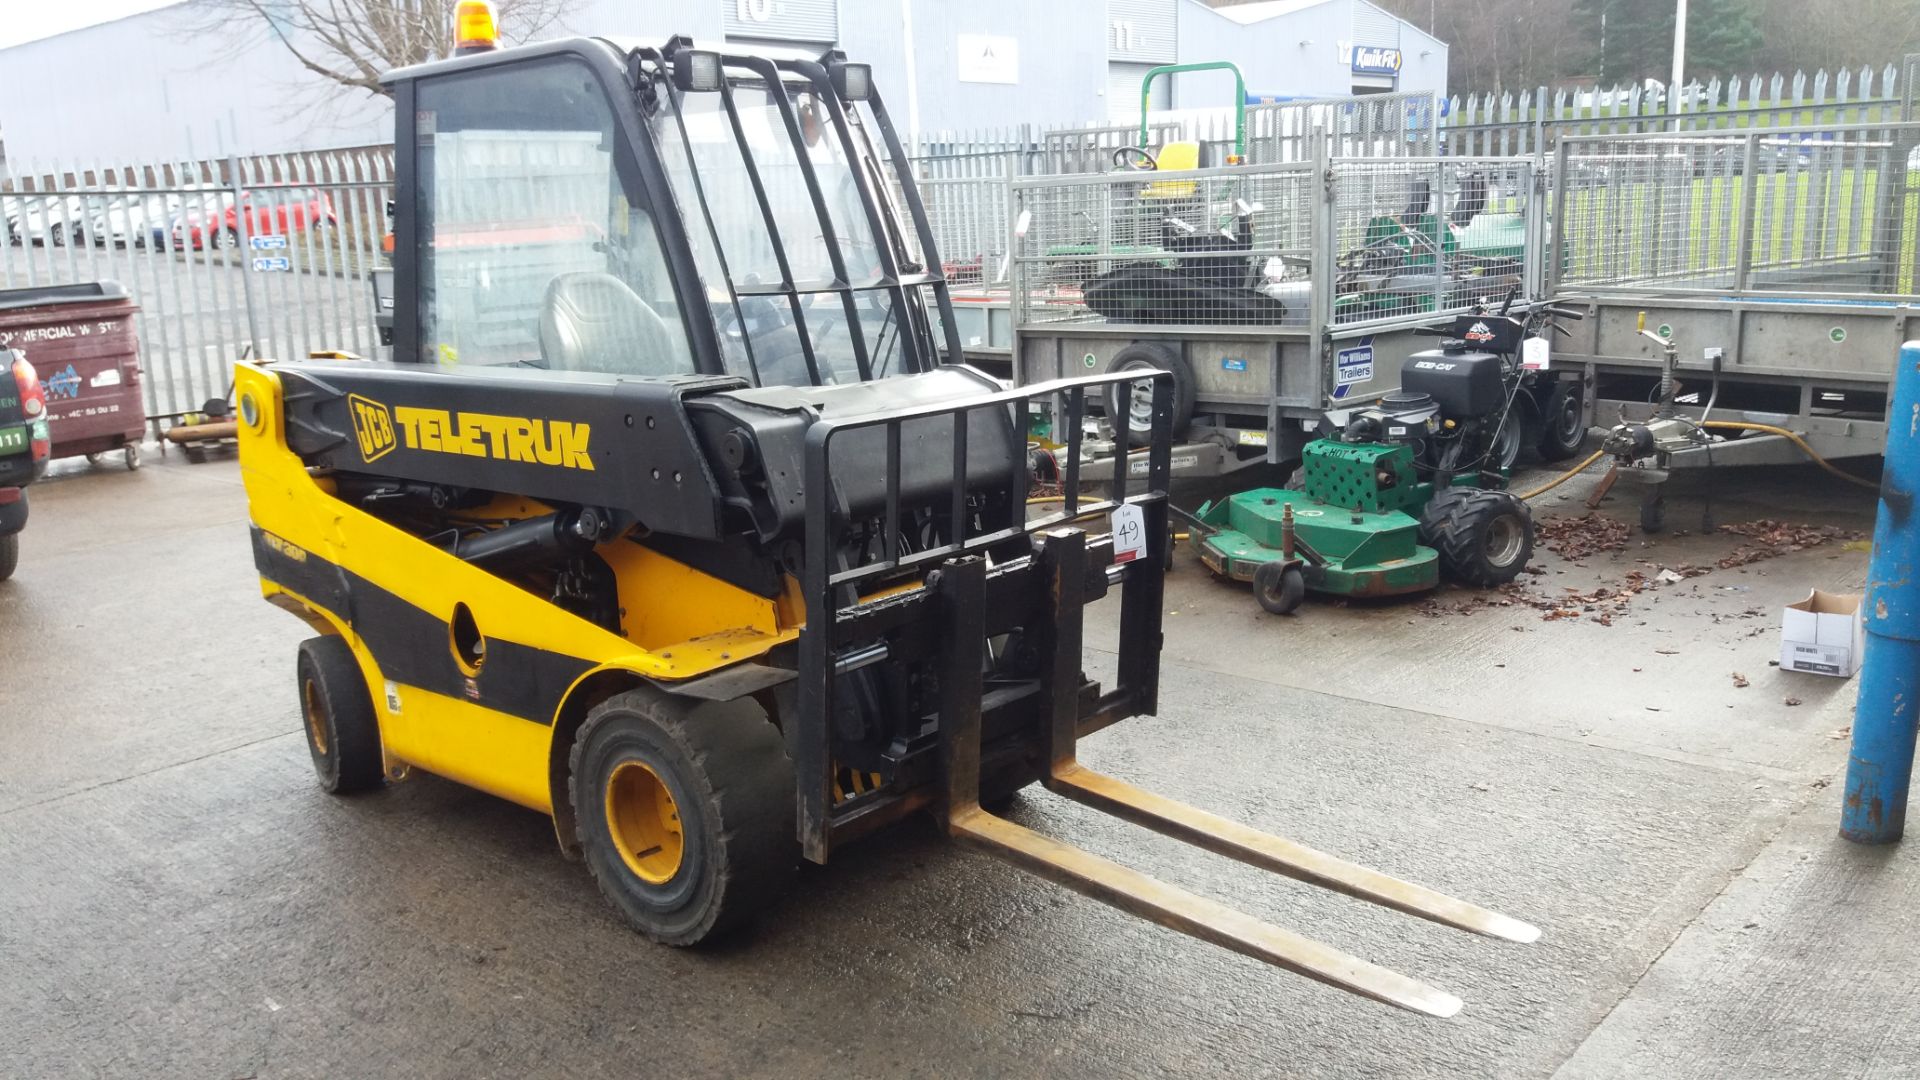 JCB TLT30 Teletruk counterbalance forklift with telescopic boom - Image 8 of 22